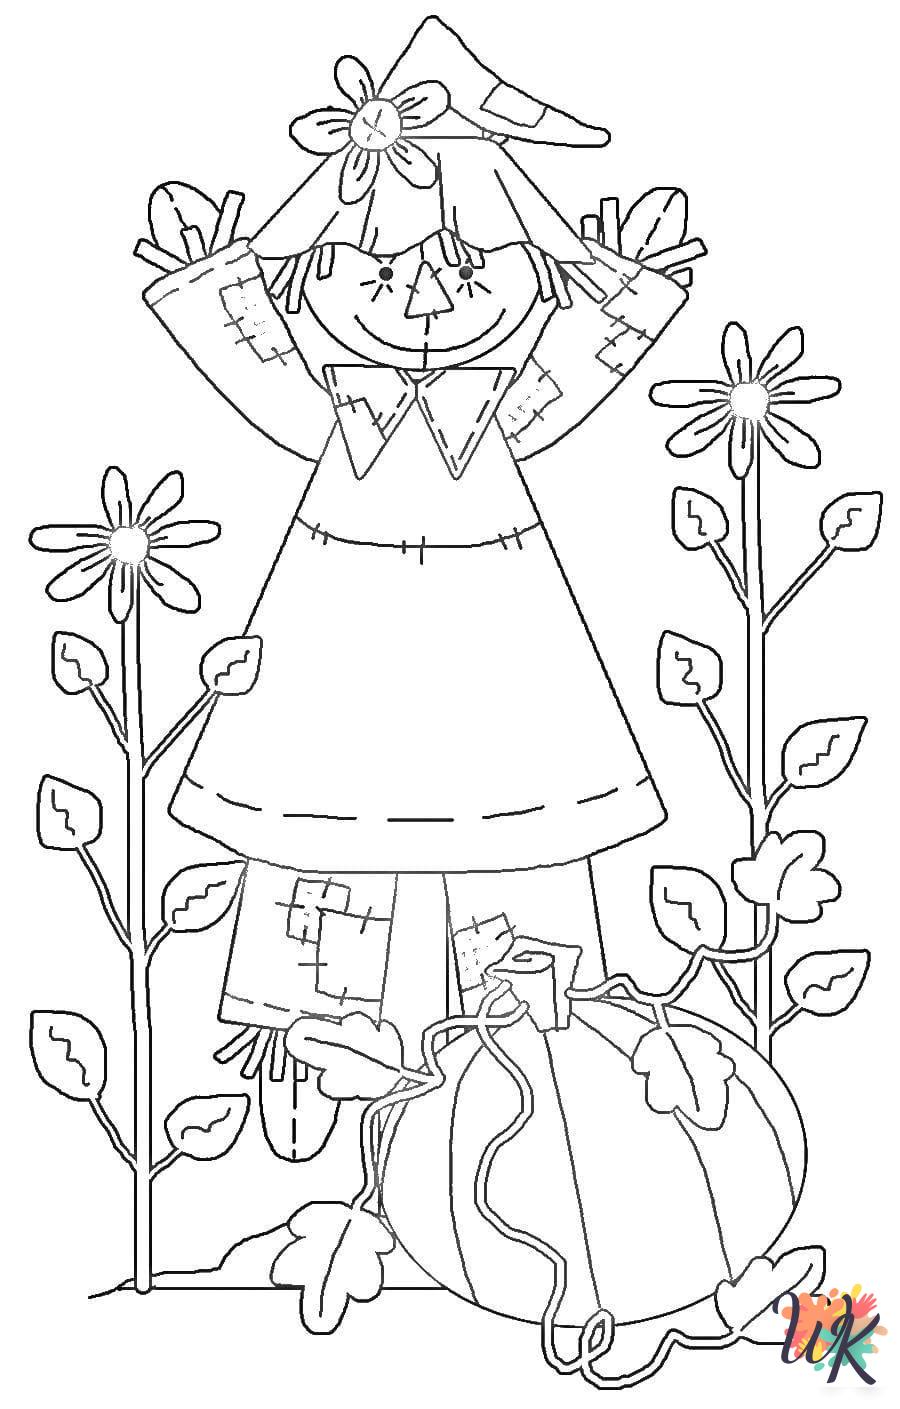 Scarecrow coloring book pages